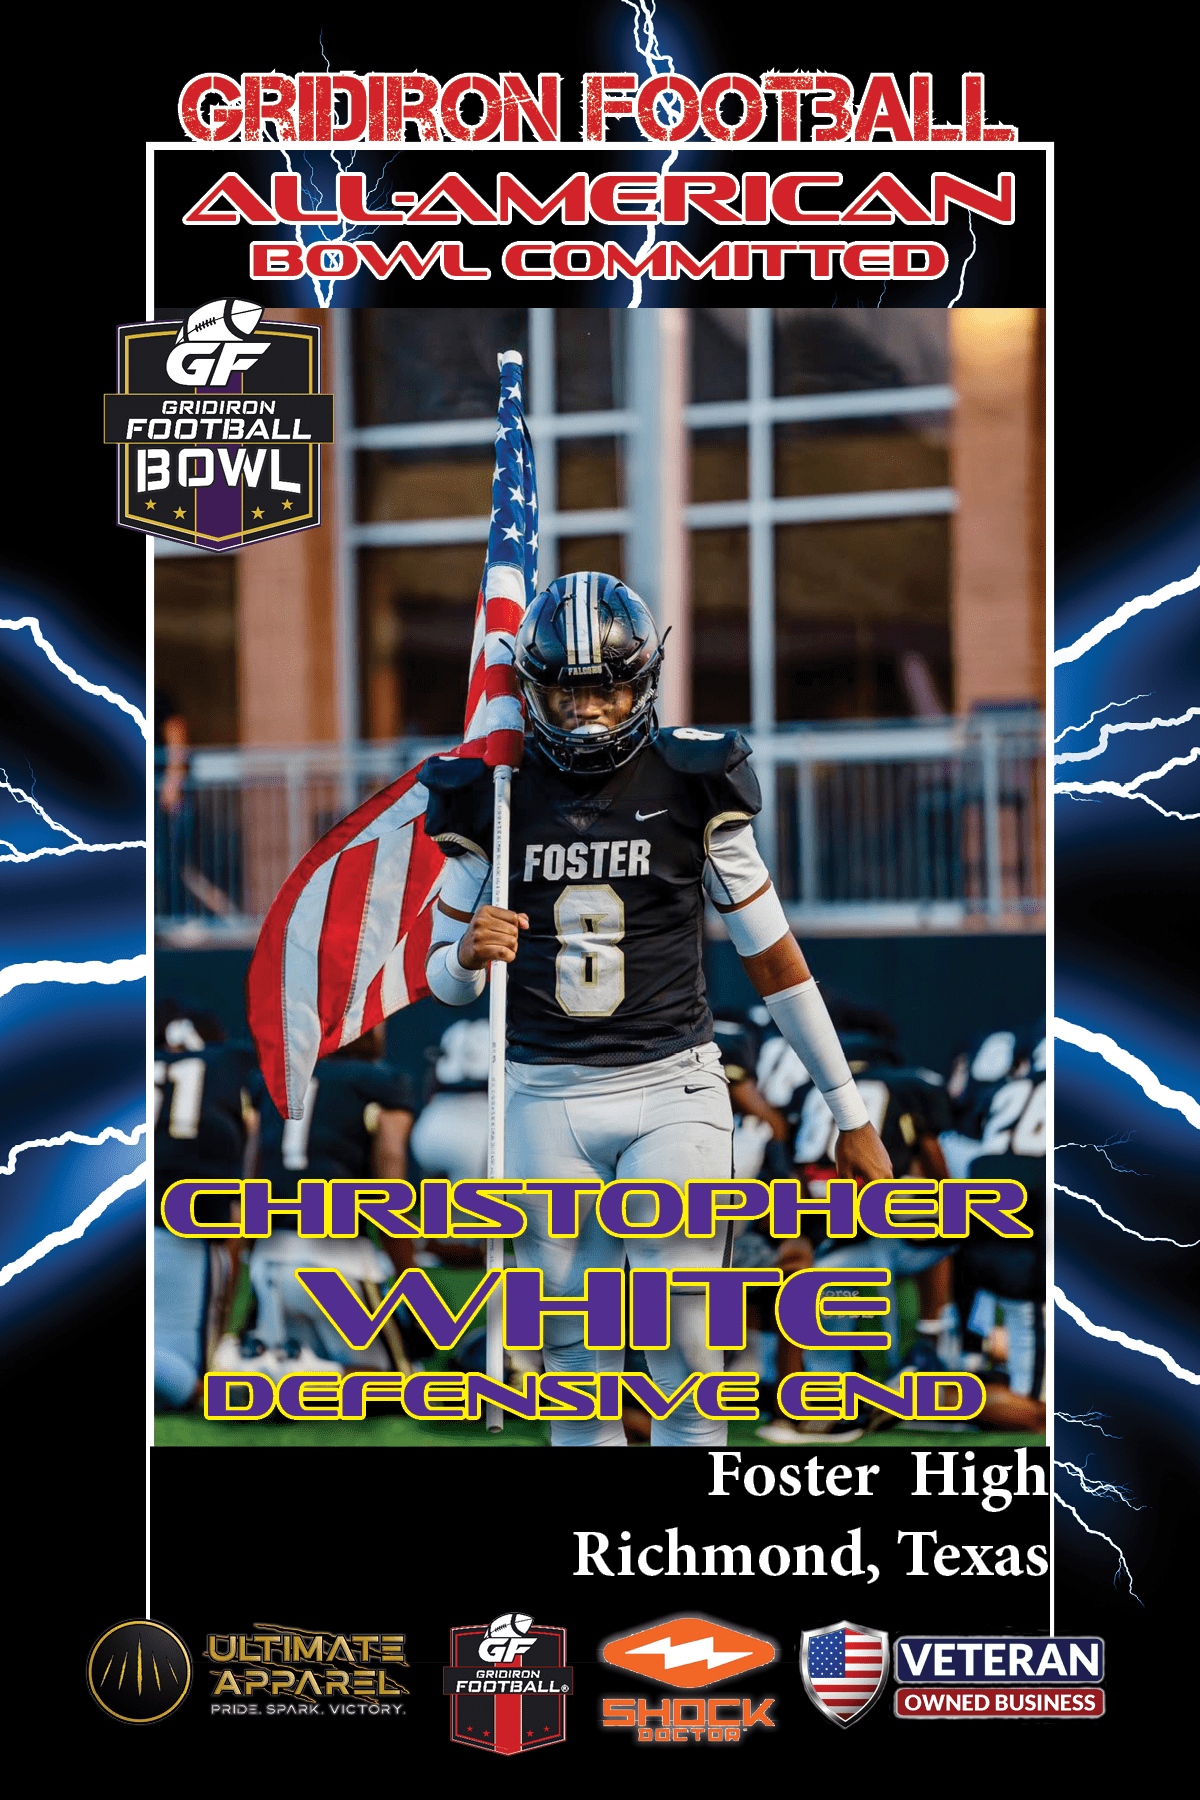 BREAKING NEWS: Foster High School (Richmond, TX) DE Christopher White Commits To The Gridiron Football All-American Bowl Game